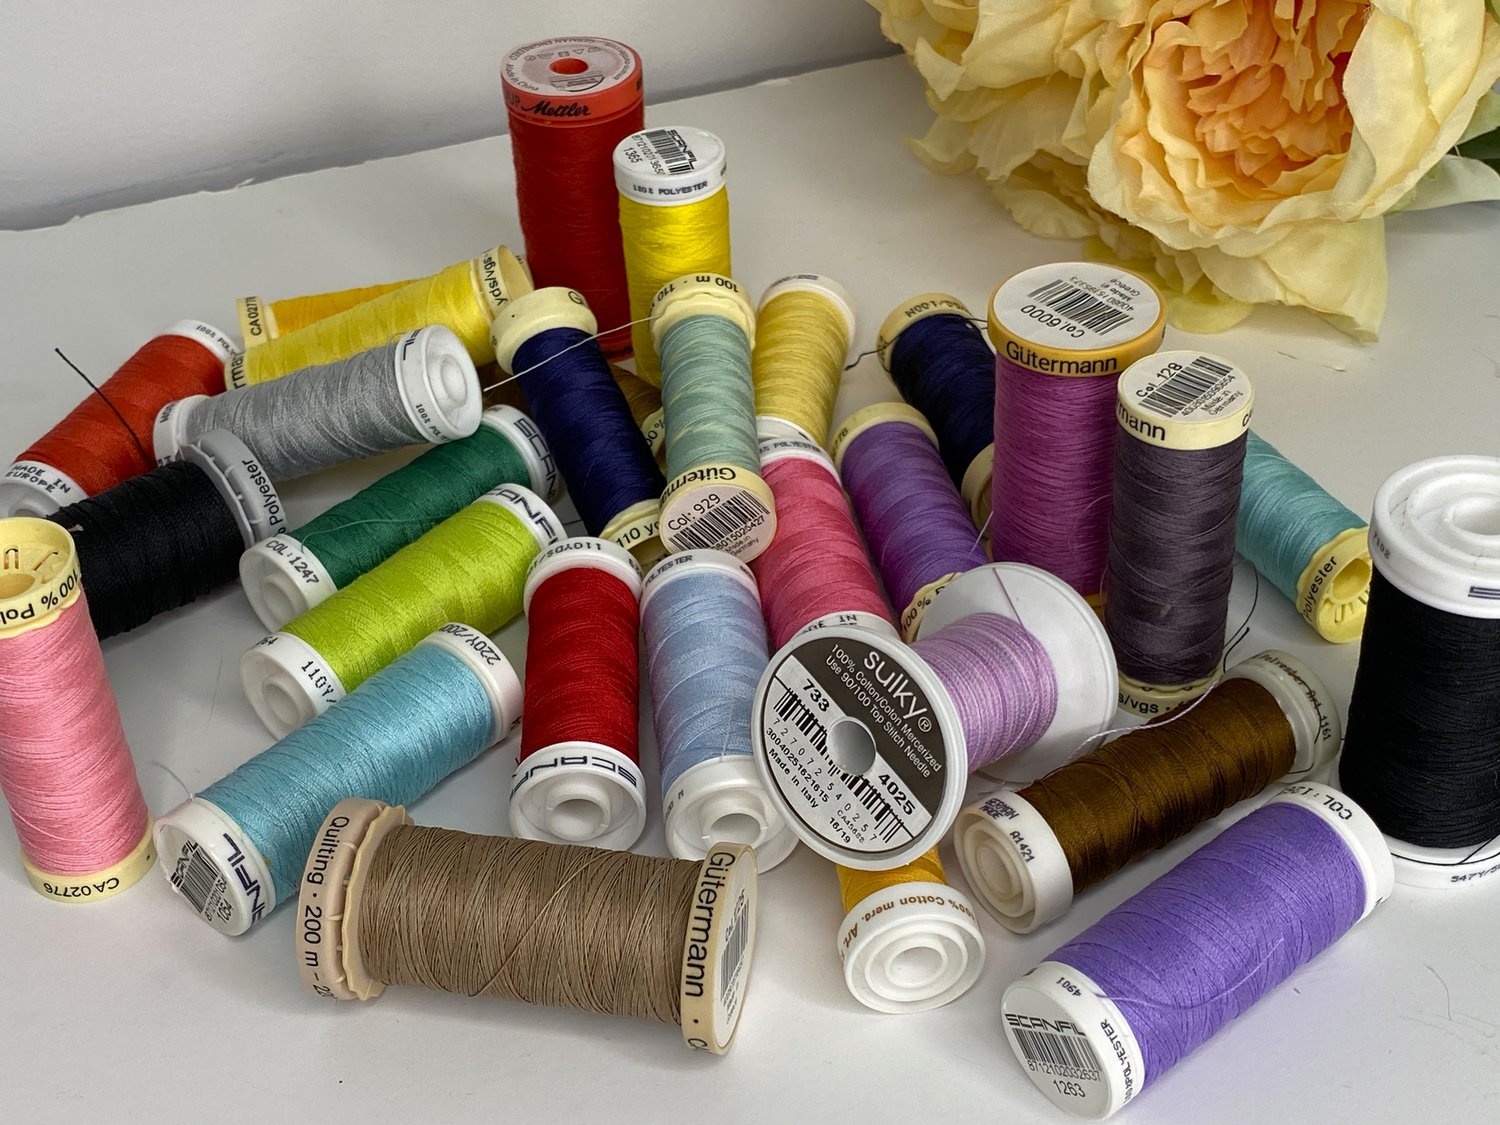 My Threads were always breaking when I was sewing, until I switched to using better quality threads. The image shows my own collection of threads now that I am using higher quality including Sulky, Aurifil, Mettler, Scanfil and Guttermann Thread. I am not loyal to any one brand.